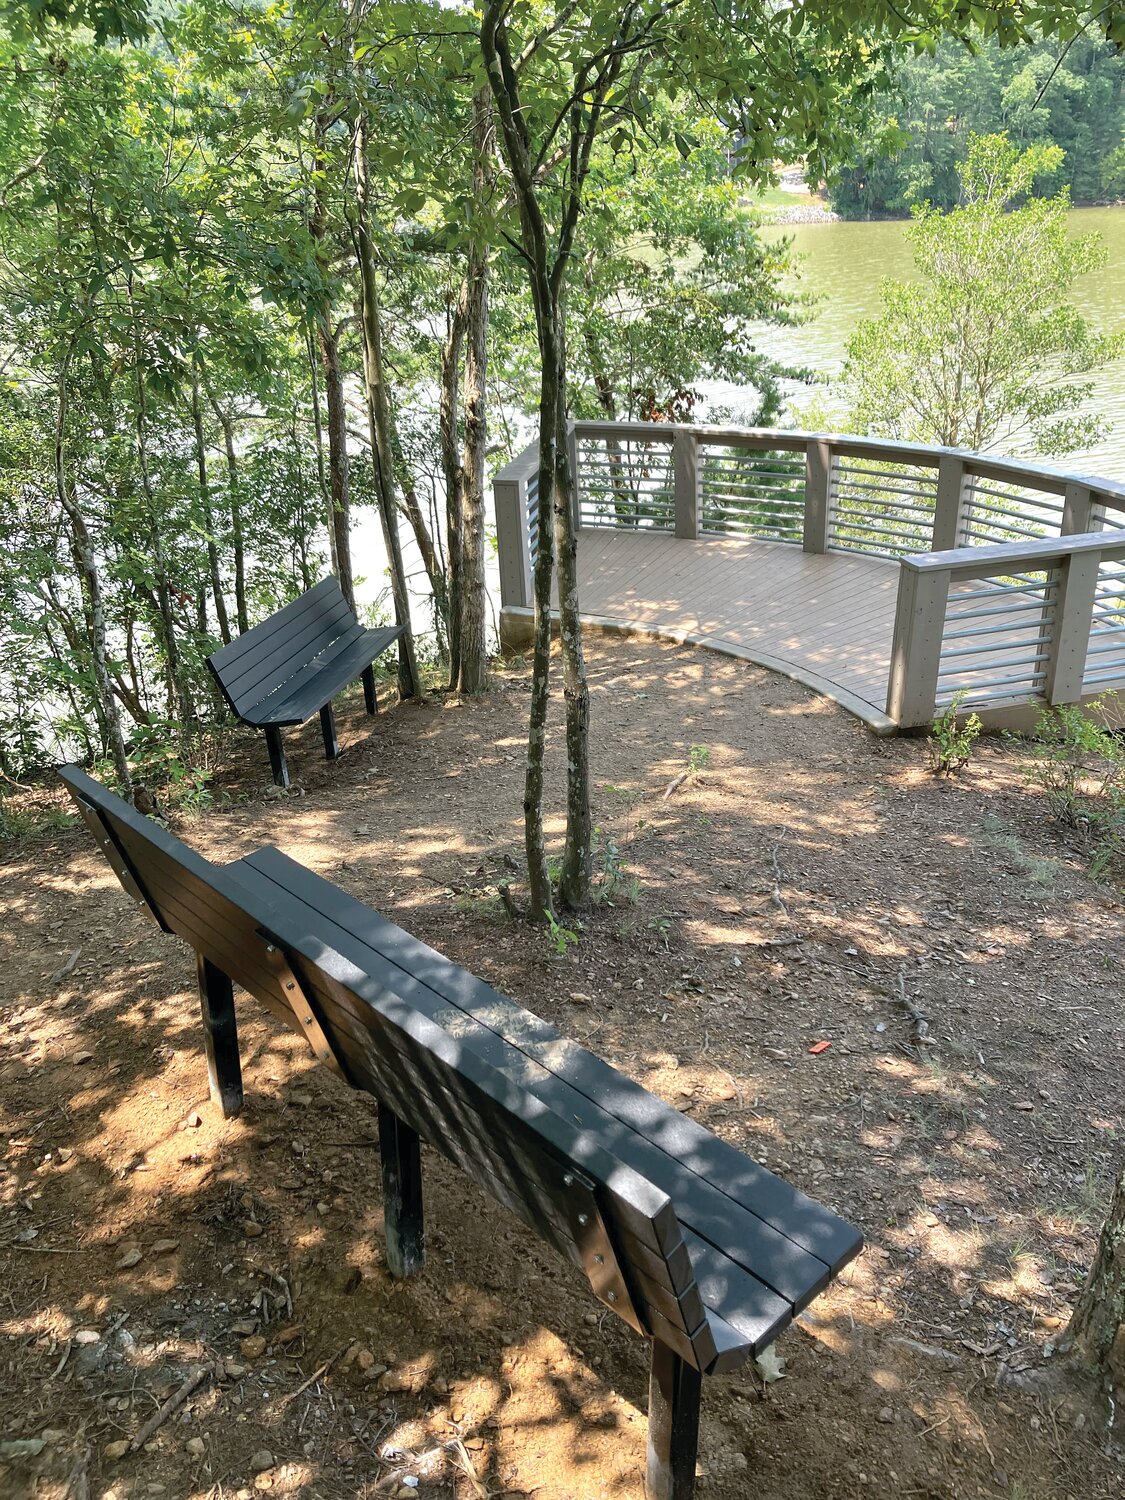 Thanks to the Friends of the Valdese Rec, two large benches have been placed just above the observation point deck at Meditation Point in Valdese Lakeside Park.